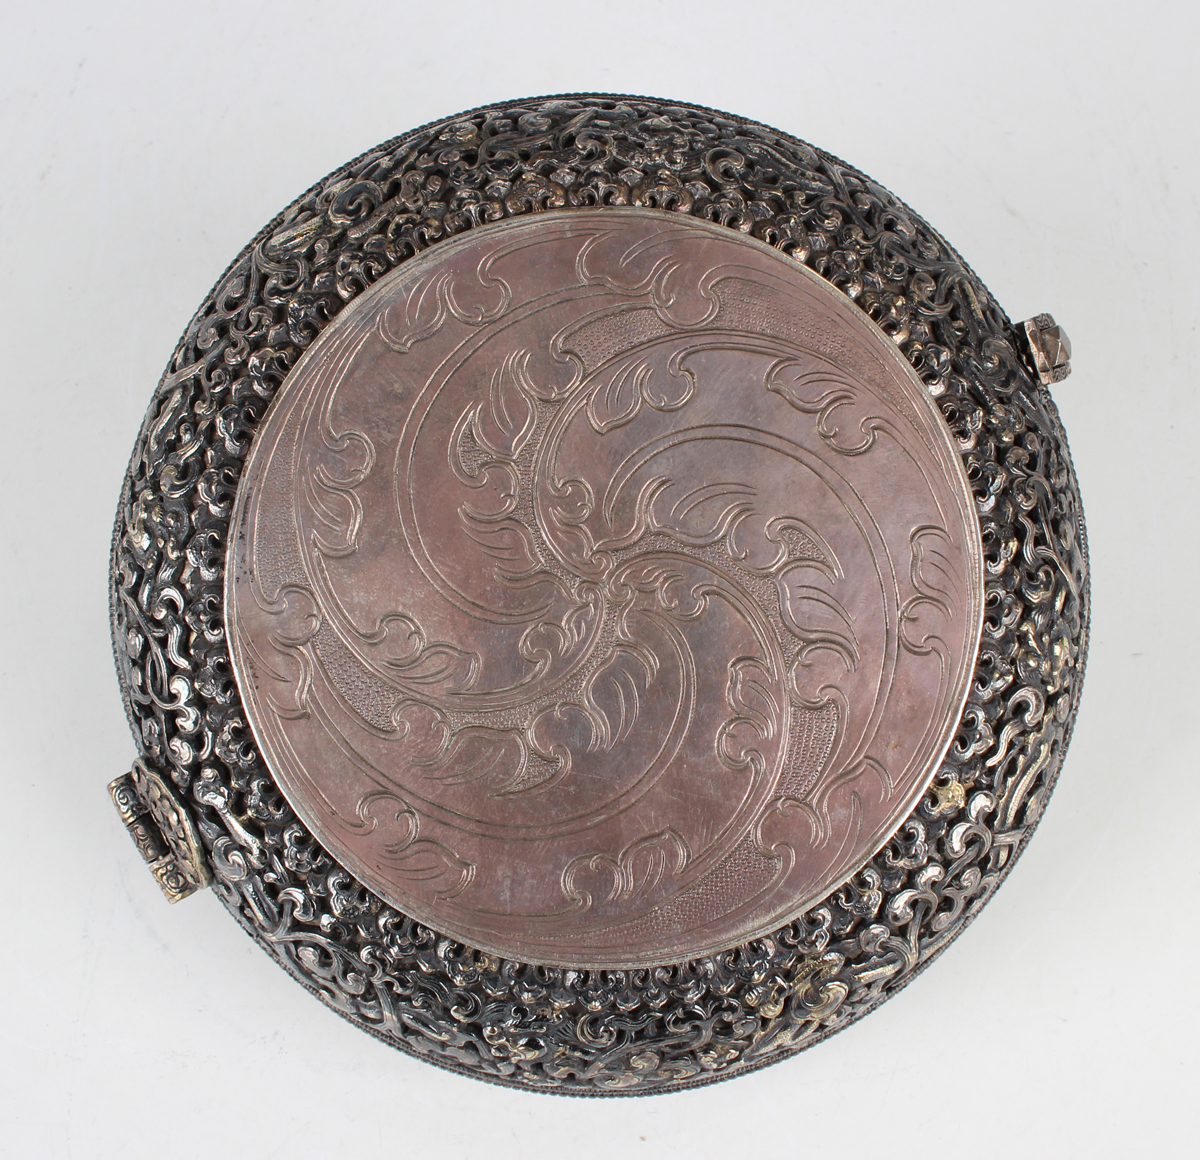 A South-east Asian white metal and parcel gilt circular box and cover, probably Tibetan or Chinese - Image 2 of 8